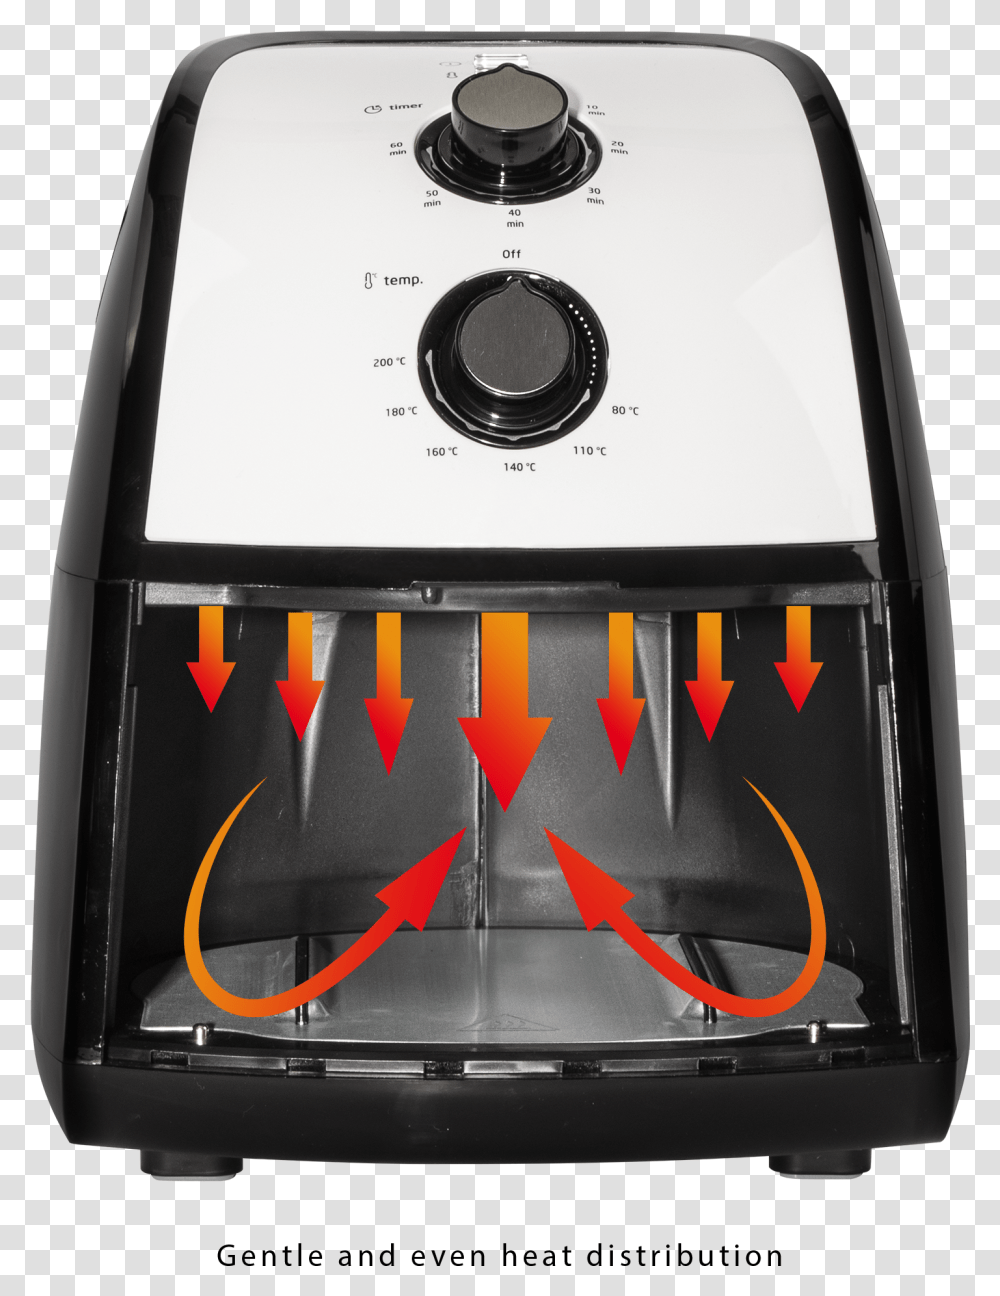 Oil And Fat Free Hot Air Fryer Download, Appliance, Heater, Space Heater, Oven Transparent Png